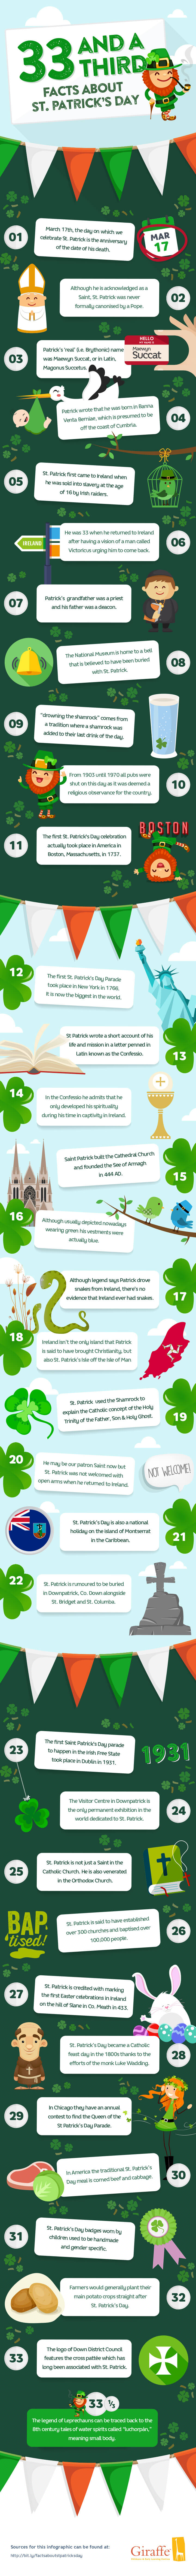 33 And A Third Facts About St. Patrick’s Day